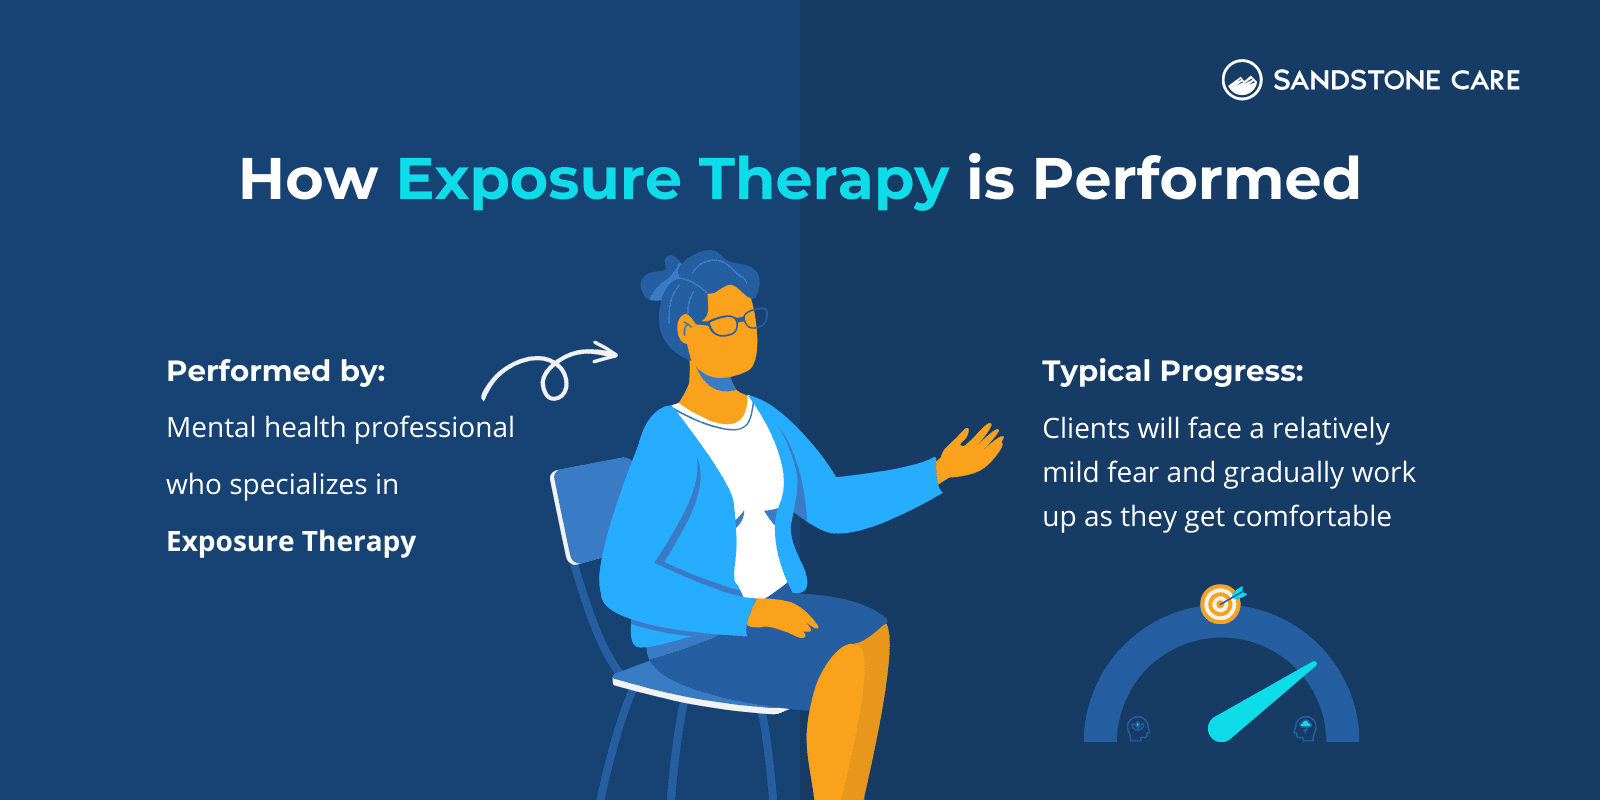 "How Exposure Therapy is Performed" written above a therapist illustration in the center and "performed by:" and "Typical Progress" text written around her